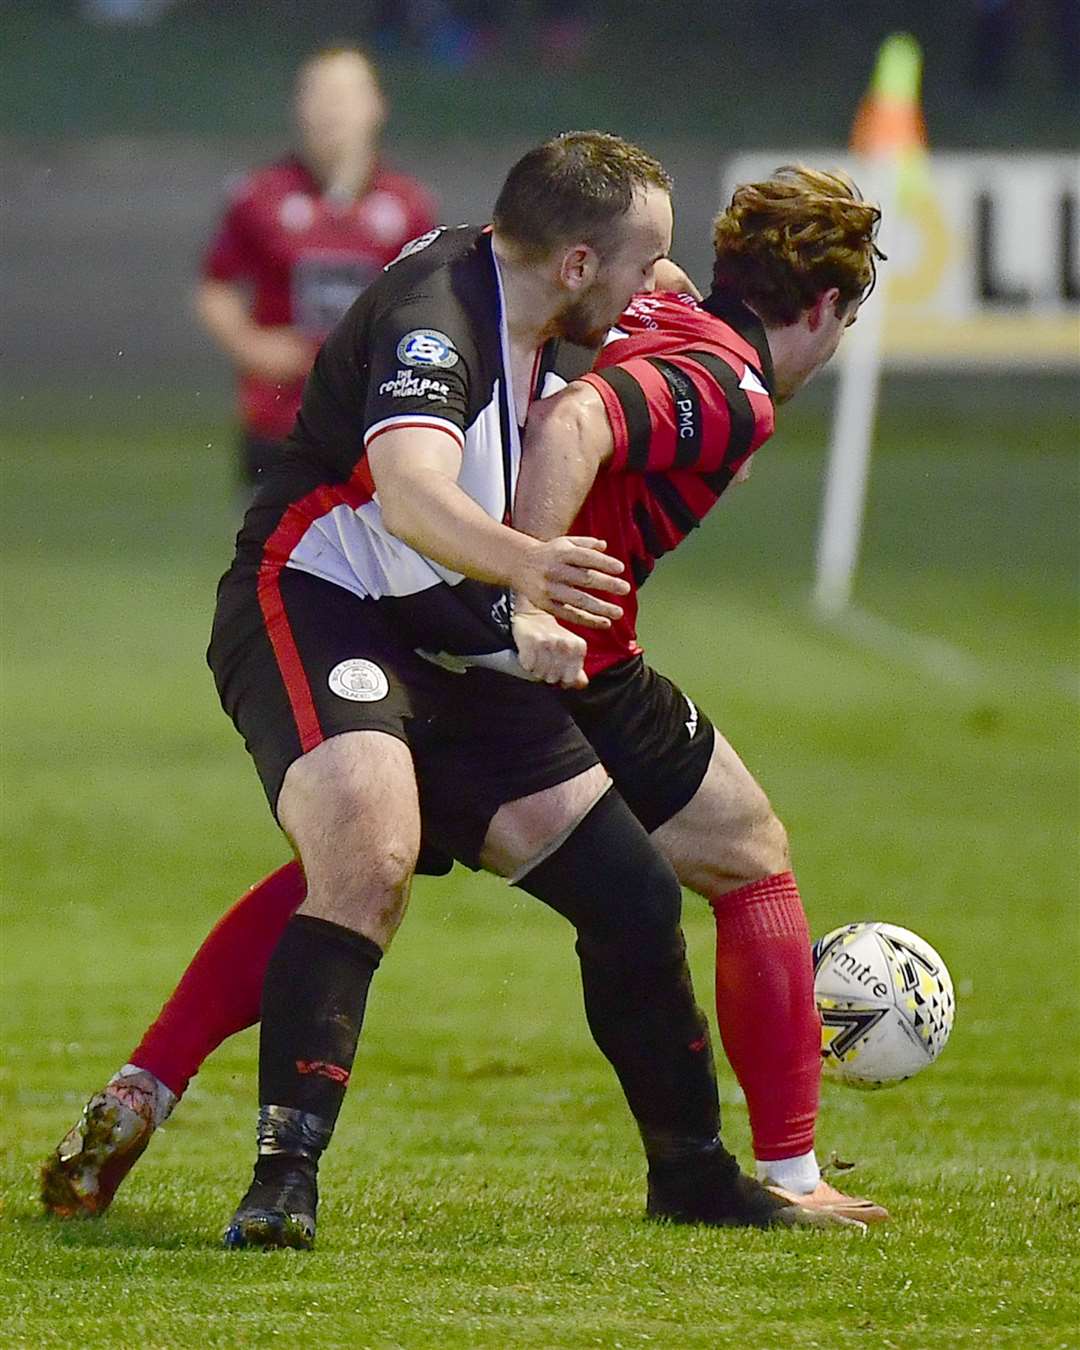 Inverurie's Myles Gaffney gets to grips with Wick defender Own Harrold. Picture: Mel Roger